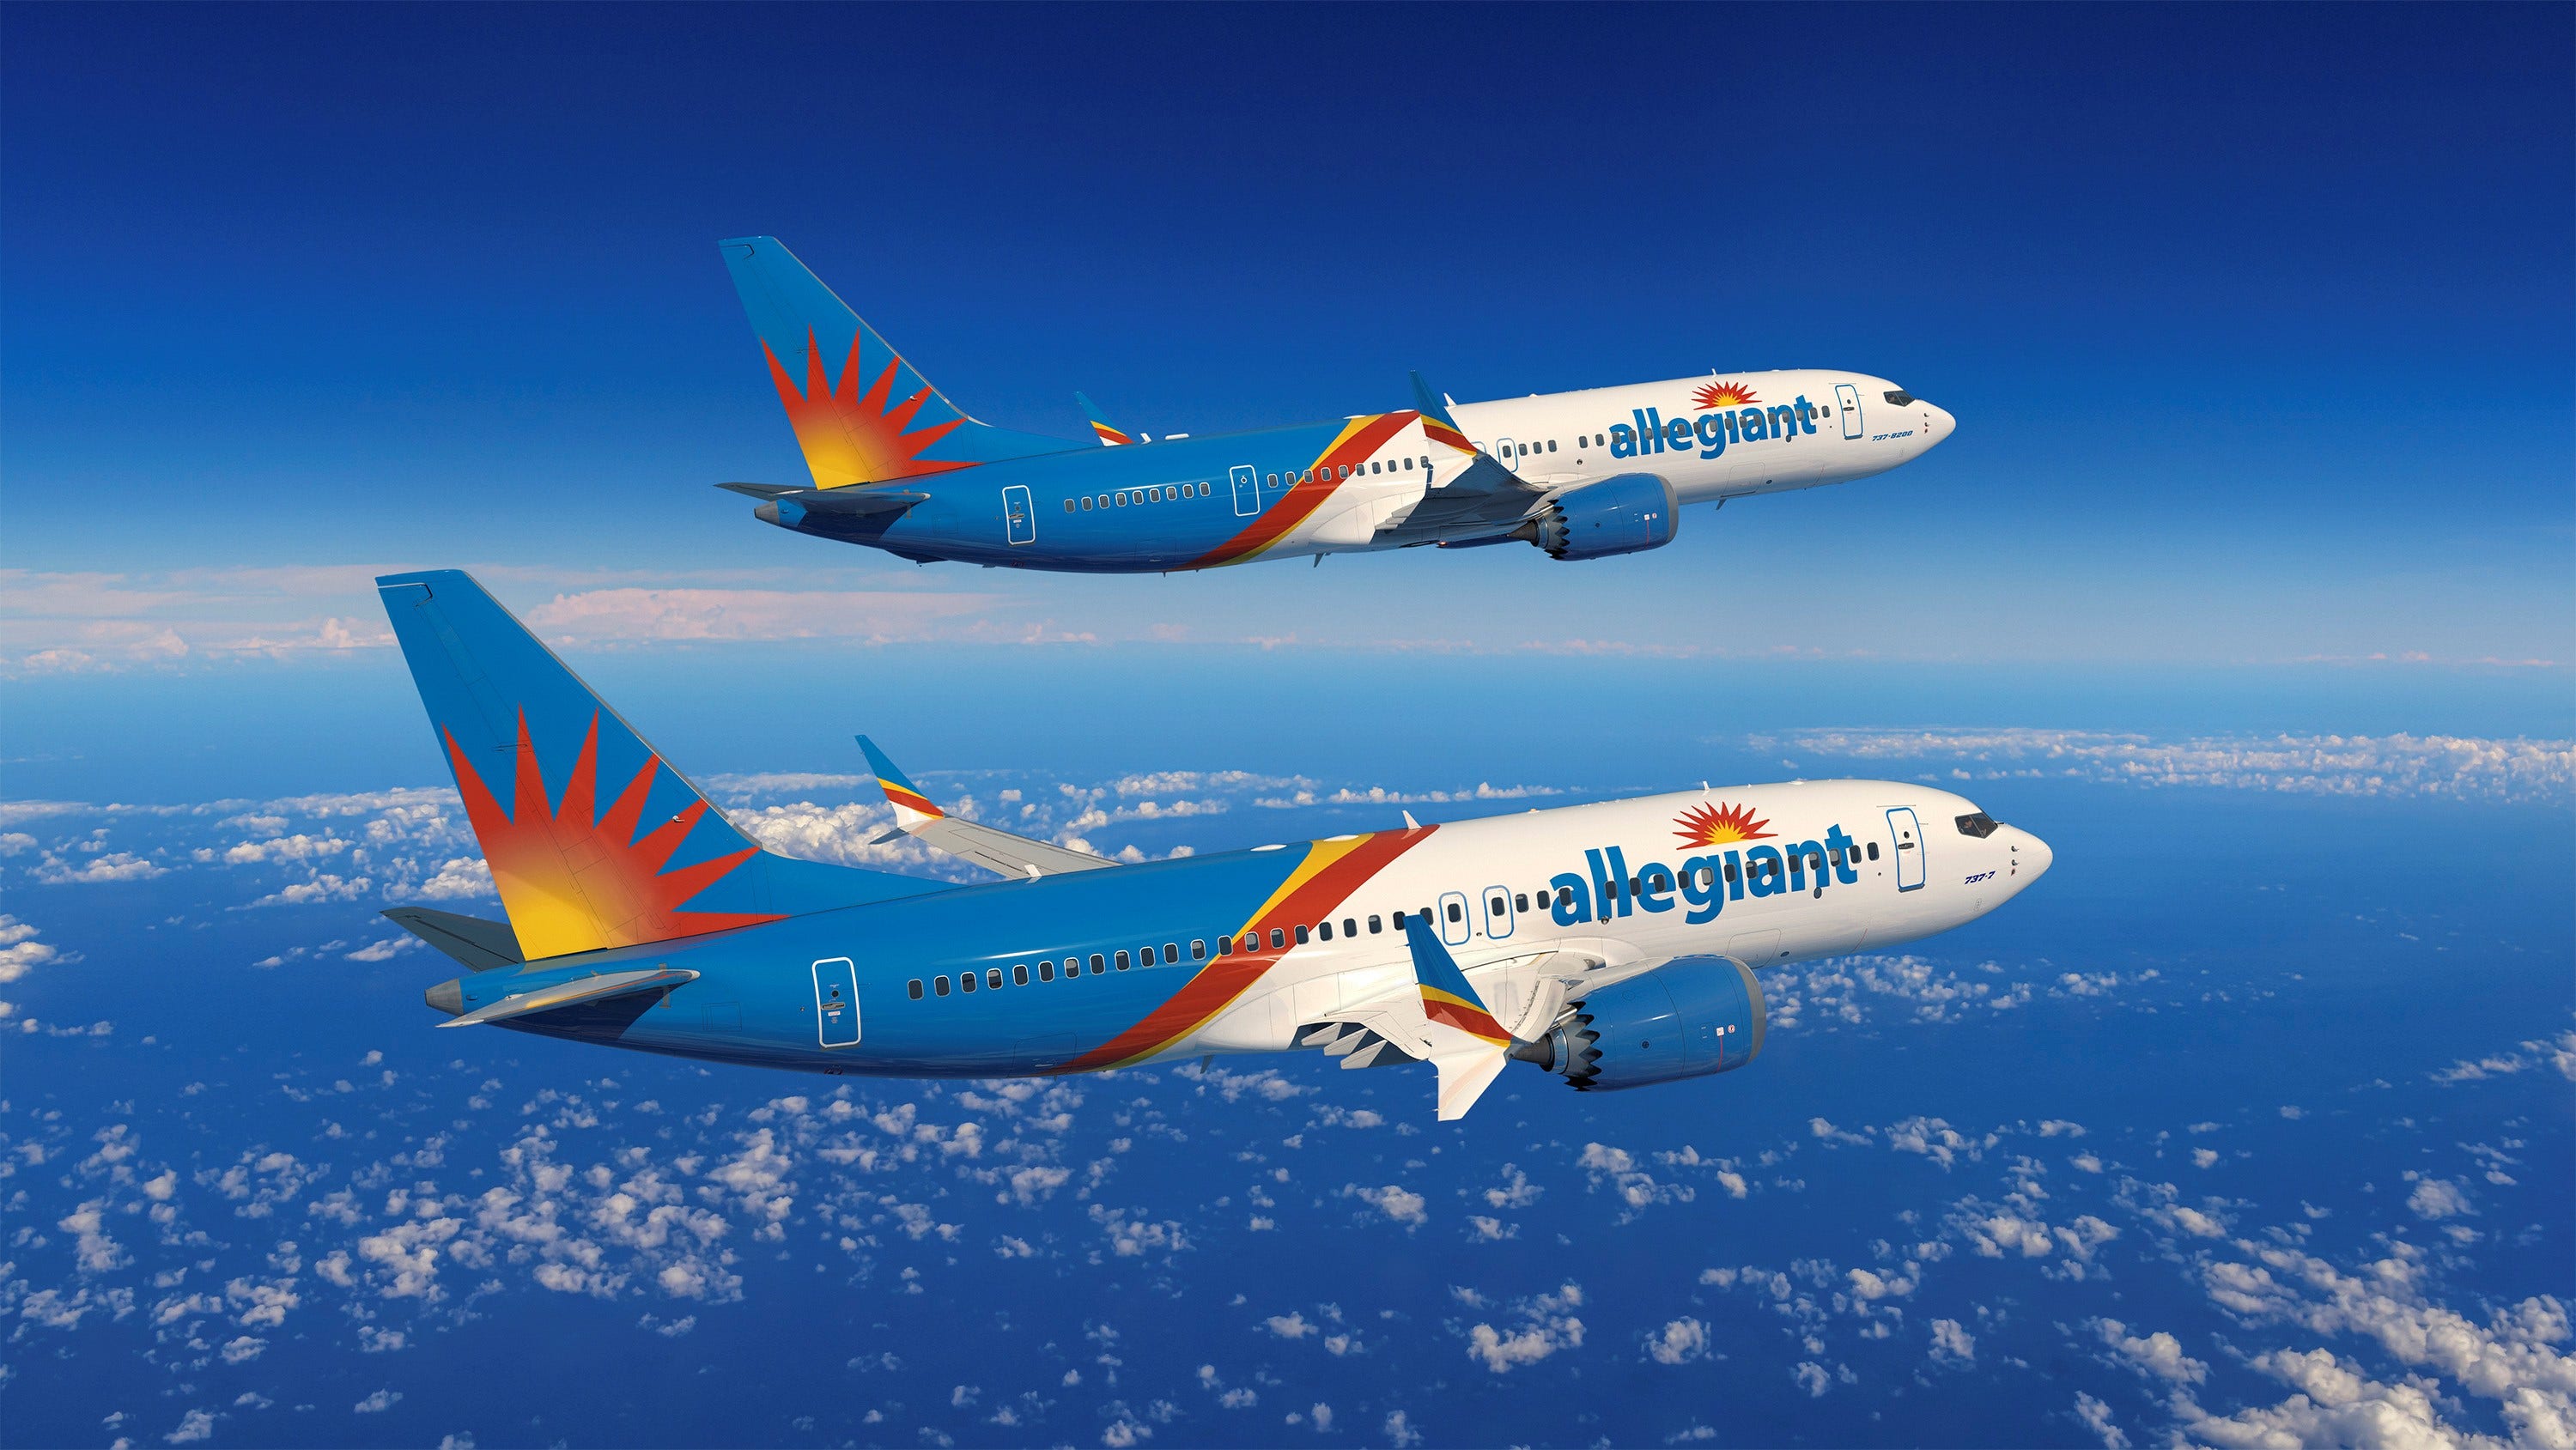 Allegiant Travel Stock Takes Off On Strong Q4 Earnings, Boeing Planes To Be Delivered In 2023